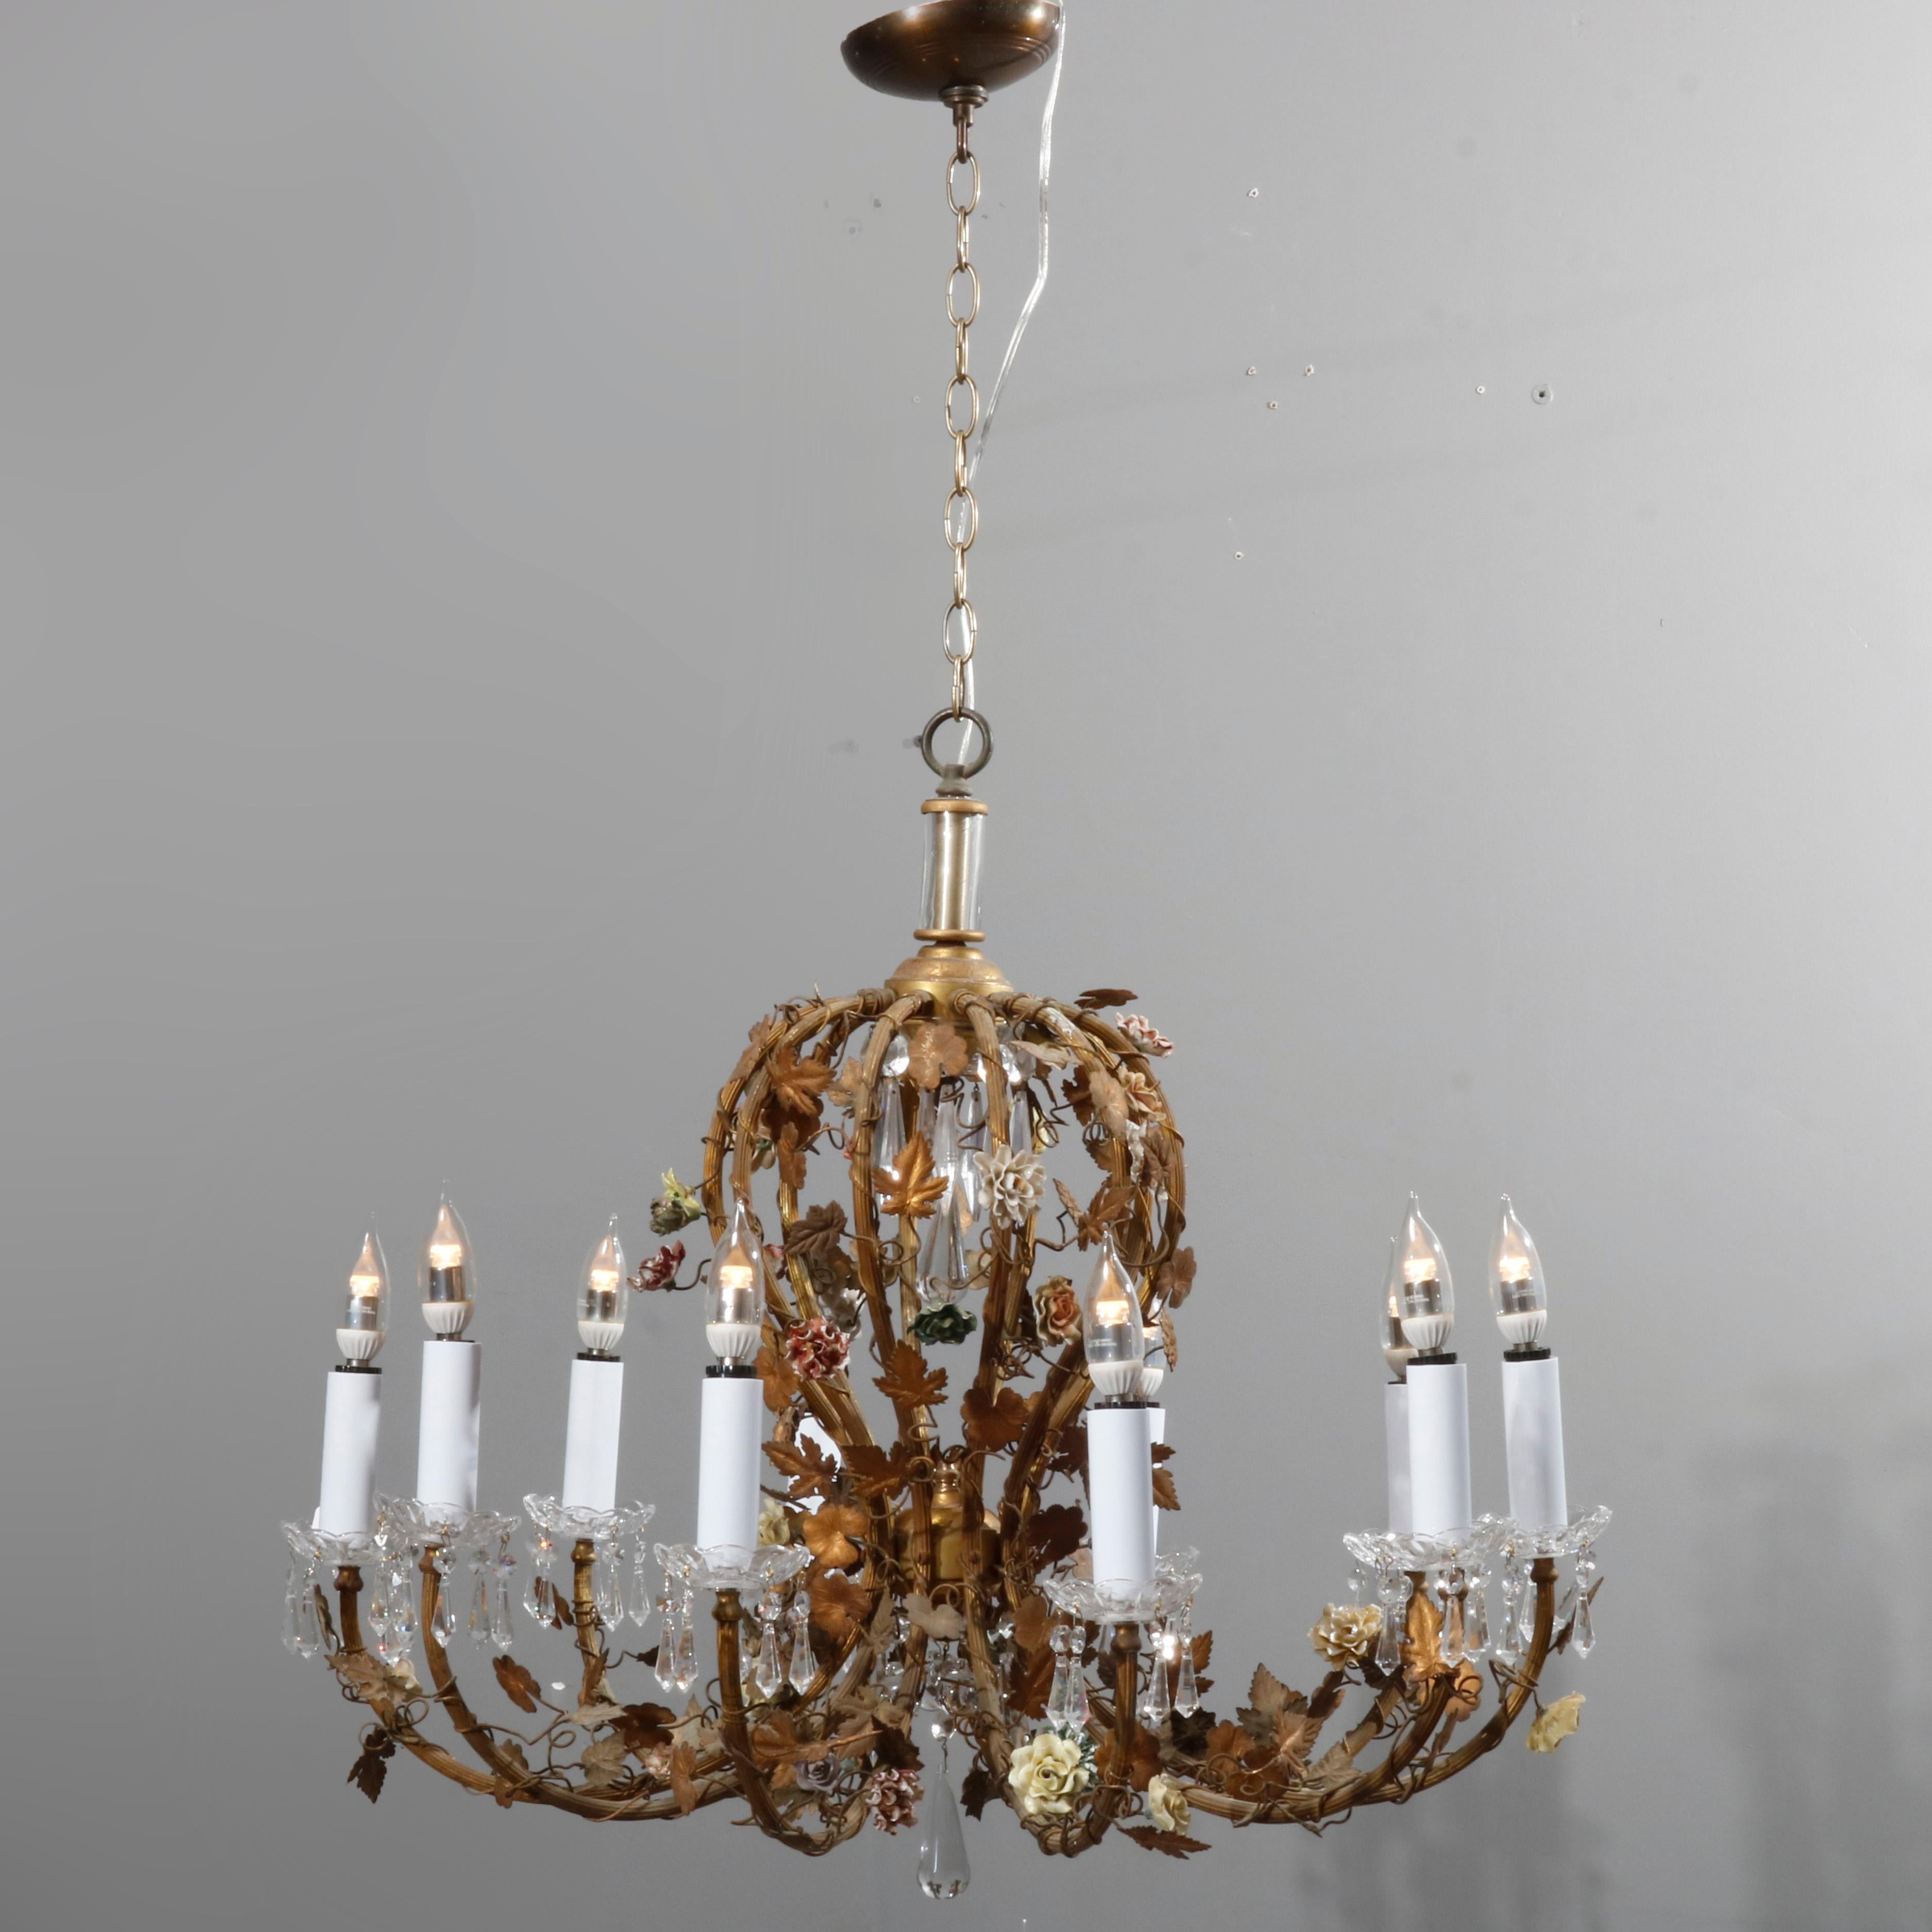 An antique French Rococo style chandelier offers gilt metal foliate form frame with porcelain flowers and scroll and ten scroll arms terminating in candle lights, professionally wired for US electricity, circa 1930

Measures: 43.5